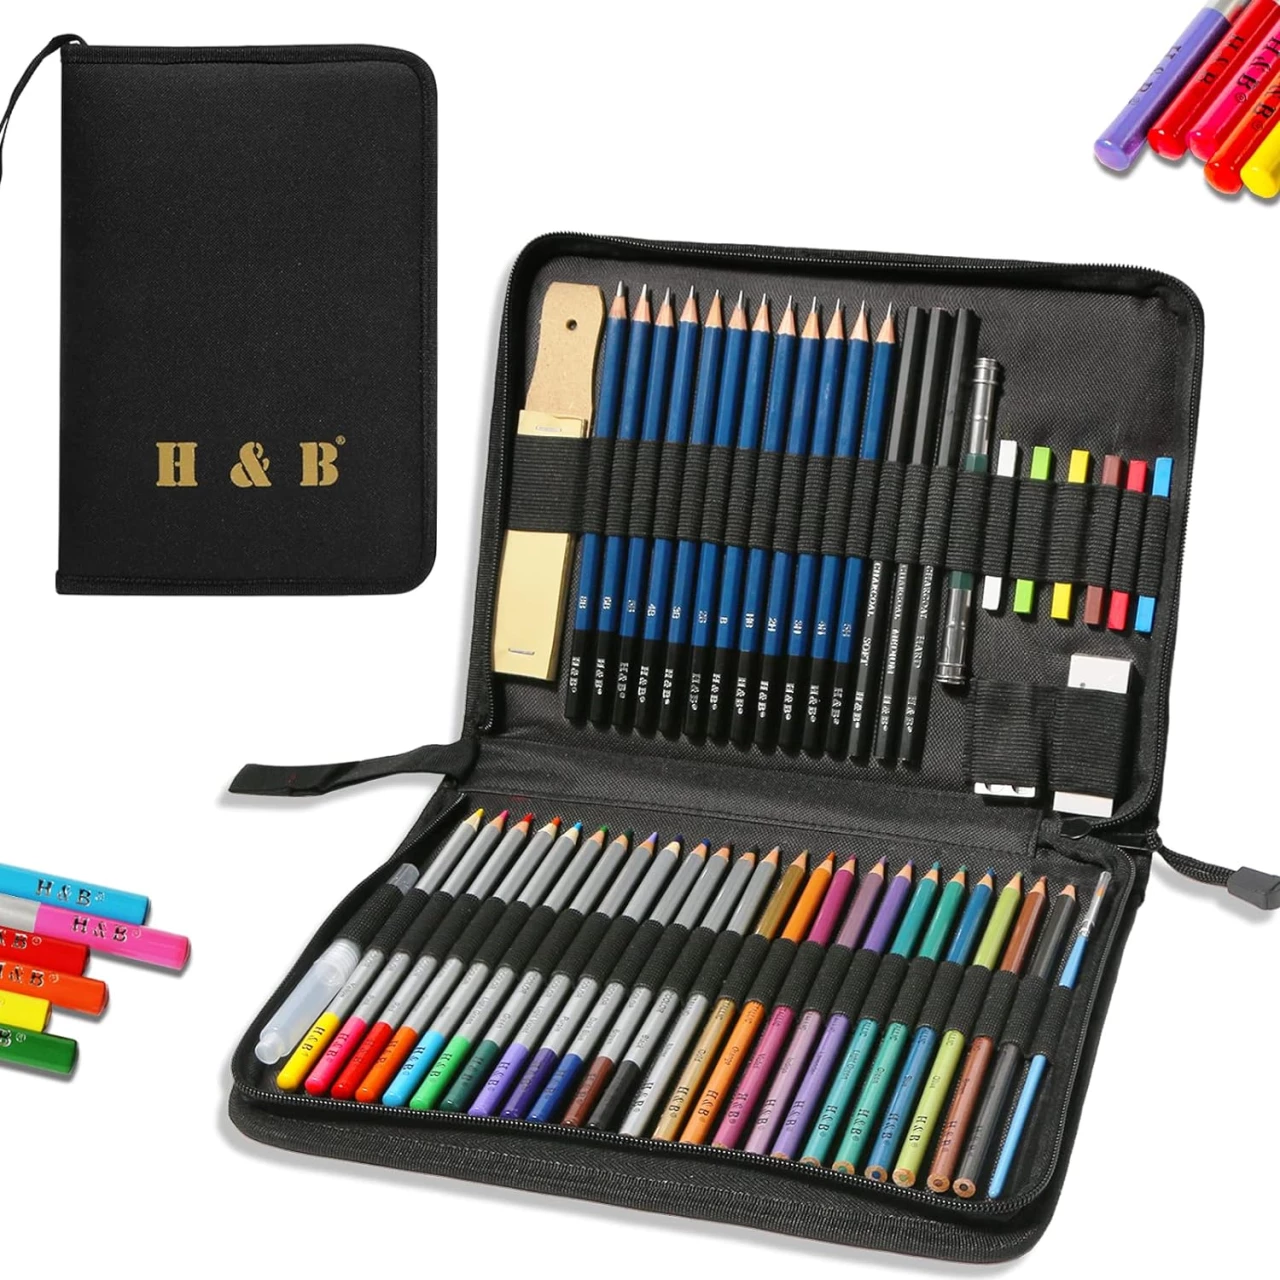 H &amp; B 51-Piece Drawing Art Pencils, 51PCS Drawing &amp; Art Supplies Kit for Kids, Complete Artist Kit, Include Graphite Pencils, Metallic Color Pencils, Water-soluble Pencils for Kids Adult Teens Artist